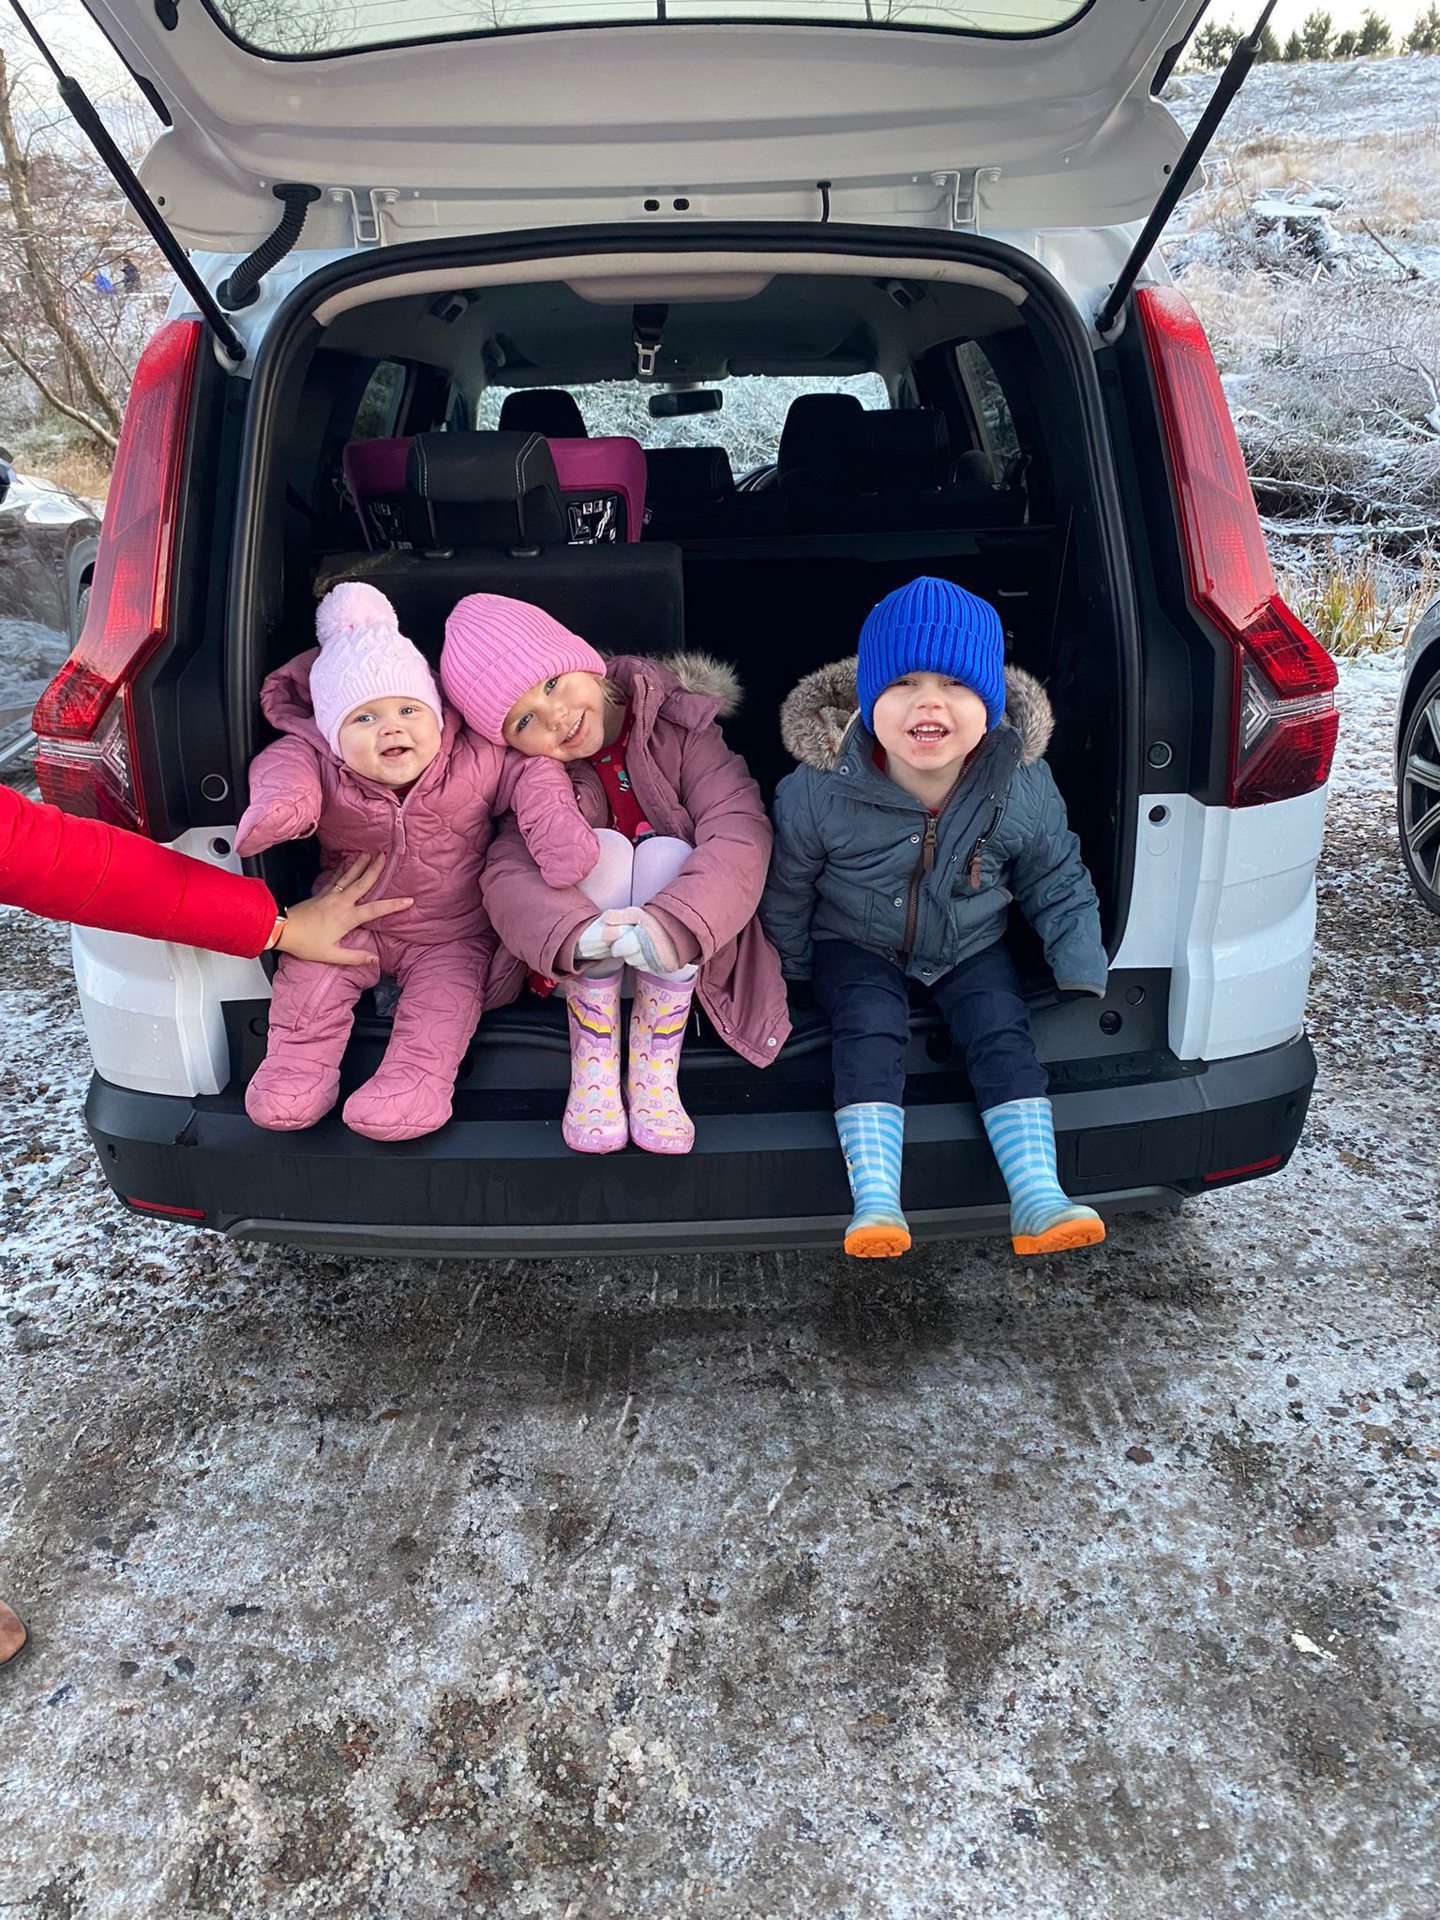 Ava, Sophie and Jack sitting on the back of a car.